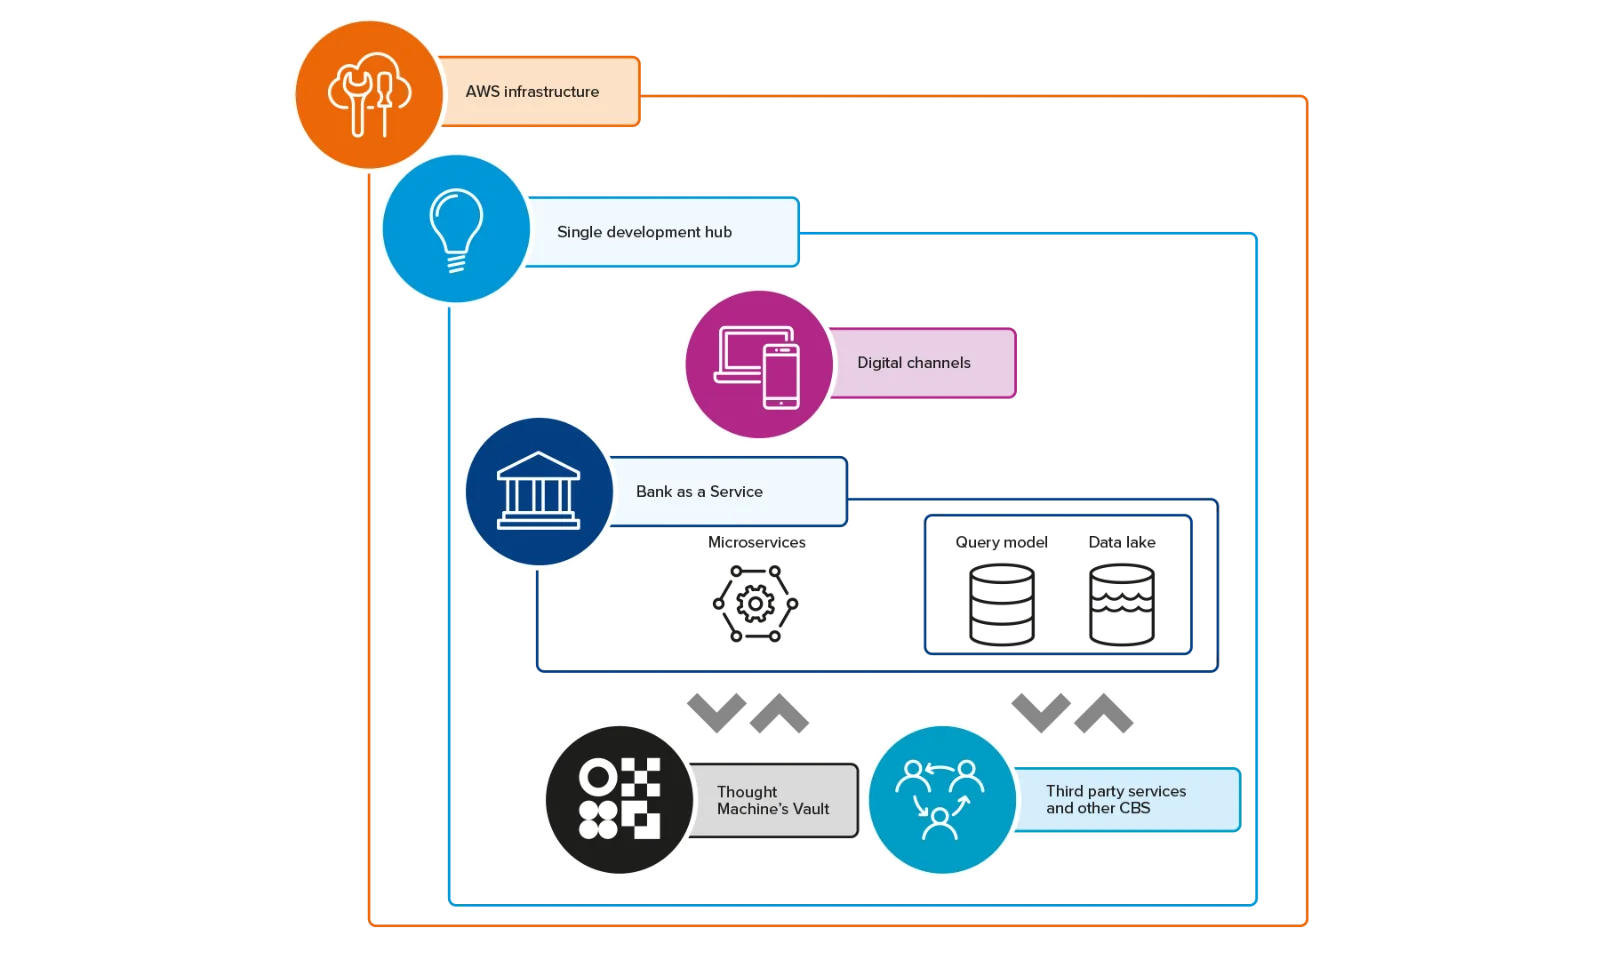 Explore the comprehensive components of the Banklitex system integrated within the AWS infrastructure. This infographic details the essential elements including the Single Development Hub, Digital Channels, Bank as a Service, Microservices, Query Model, Data Lake, Thought Machine’s Vault, and Third-Party Services. Ideal for understanding the robust and modular banking service architecture.